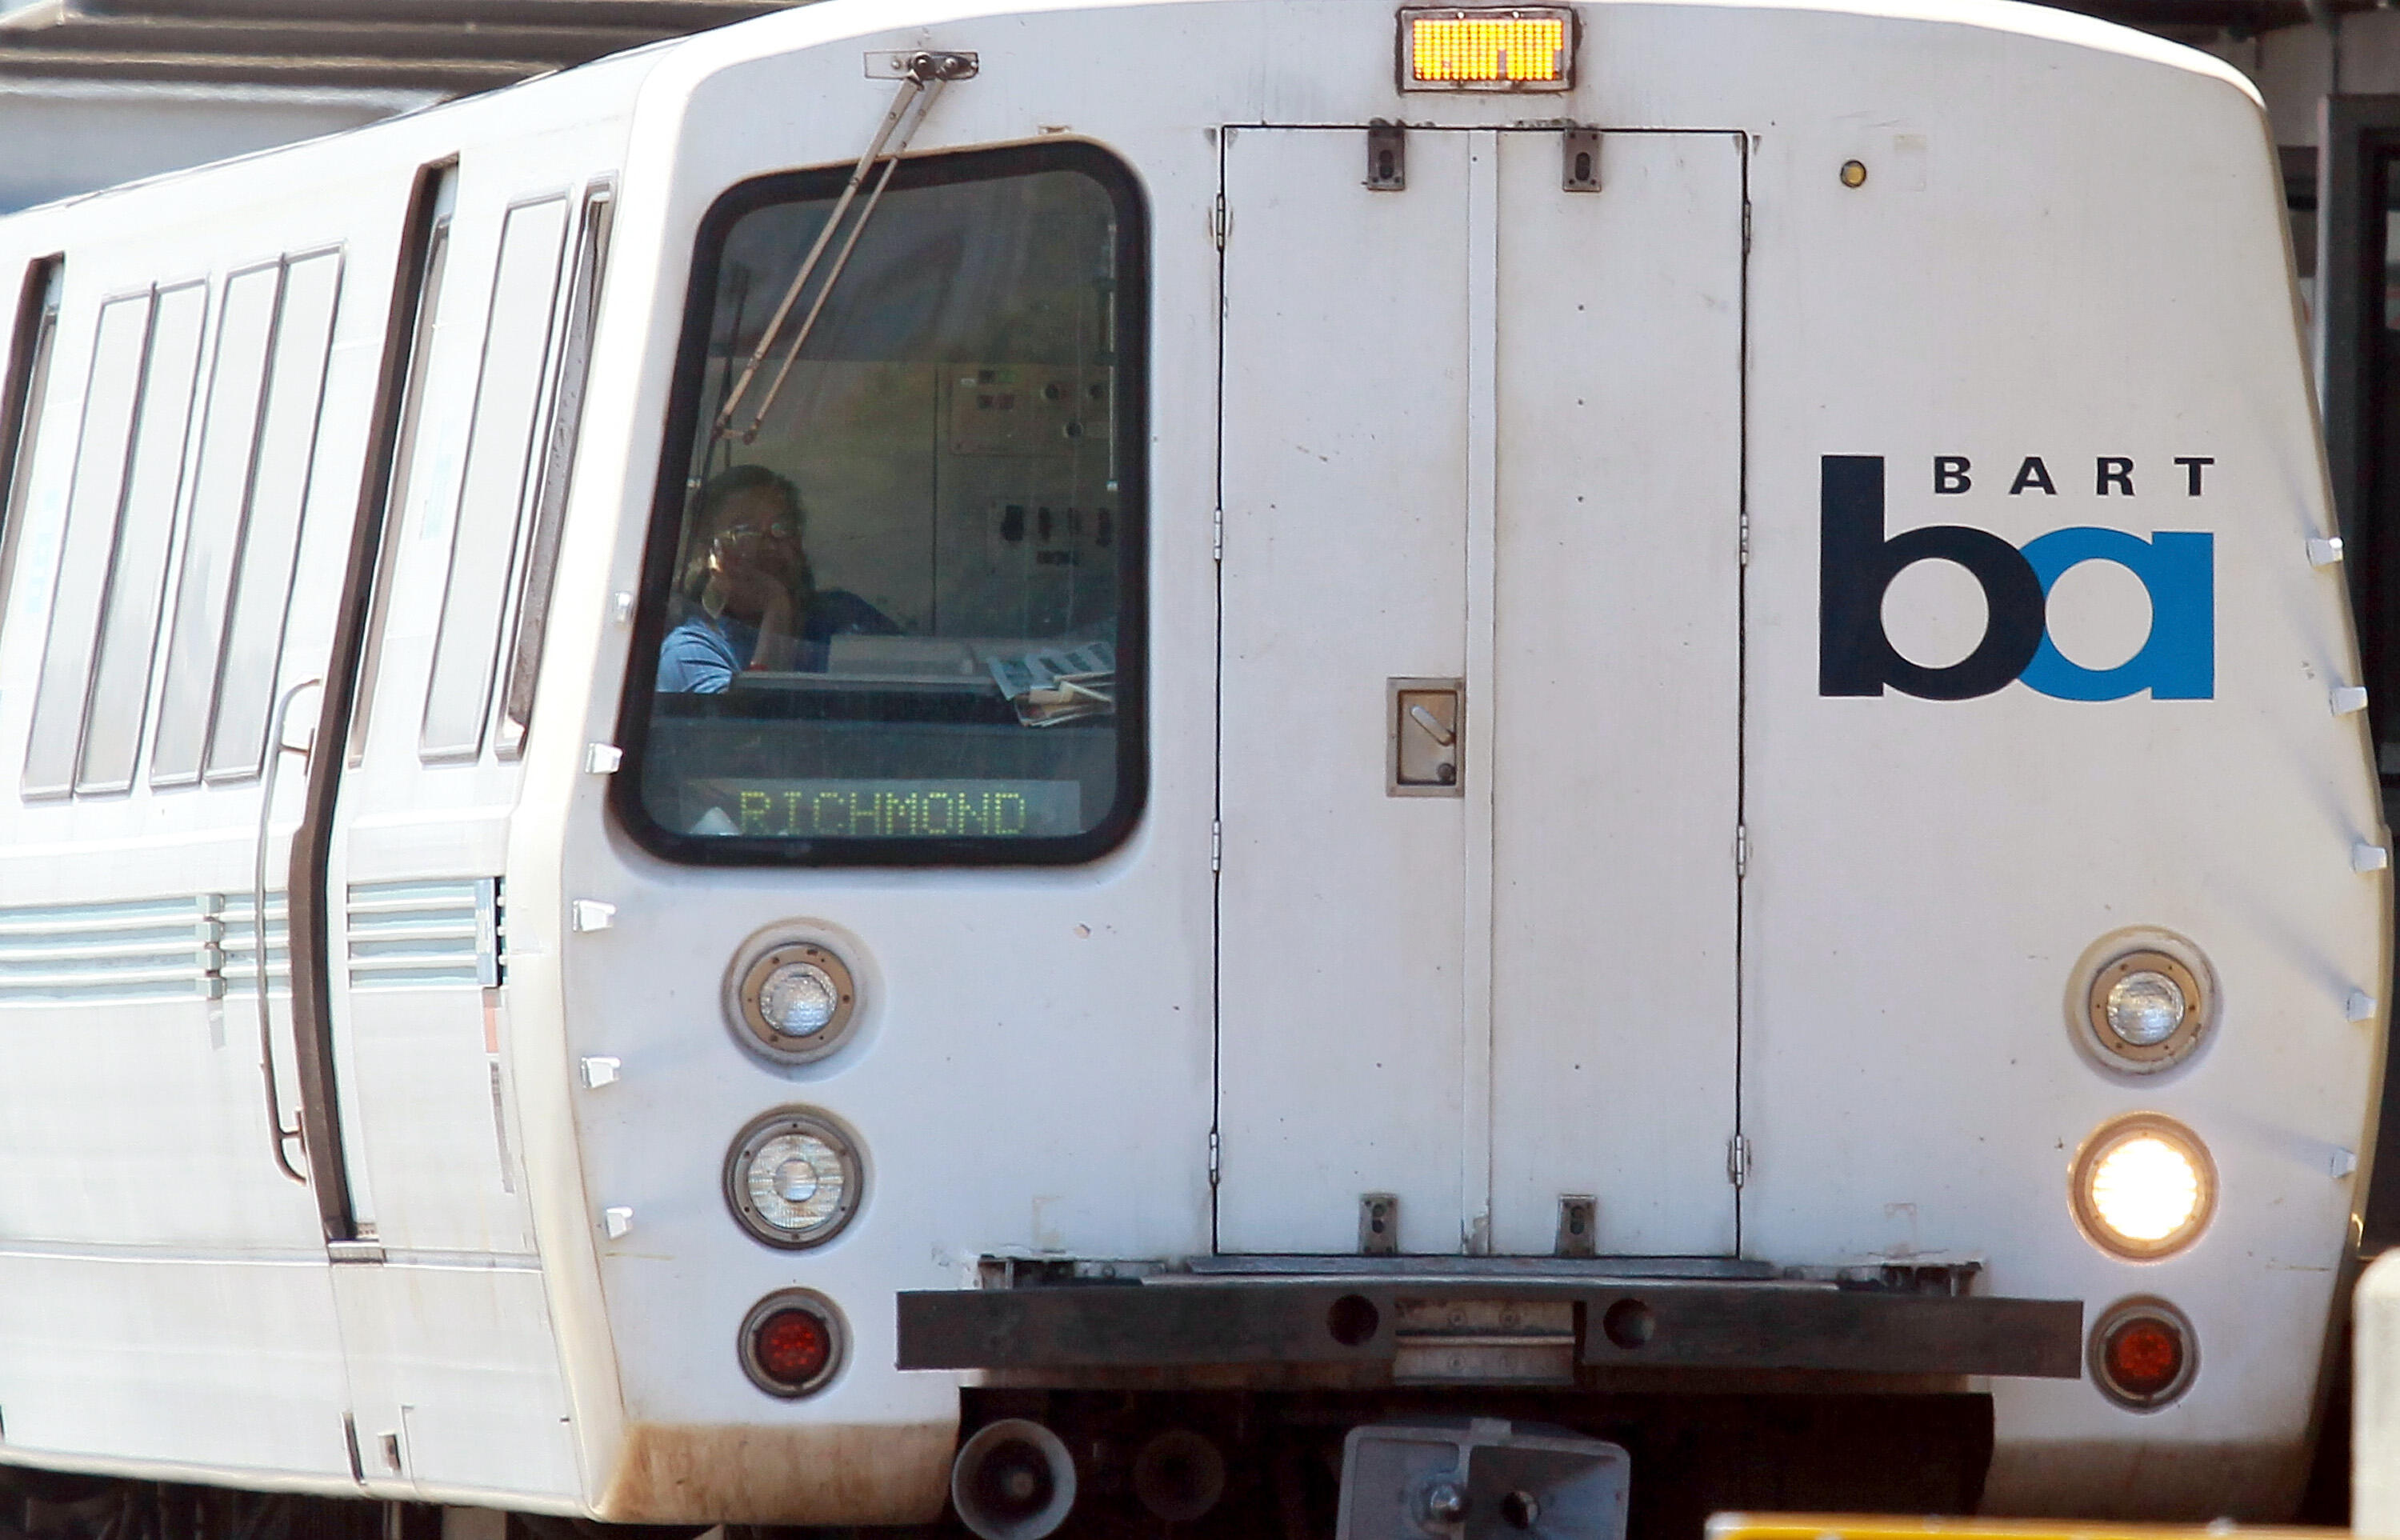 DALY CITY, CA - AUGUST 15:  A Bay Area Rapid Transit (BART) train operator waits for passengers to enter the train at the Daly City station on August 15, 2011 in Daly City, California.  The hacker group 